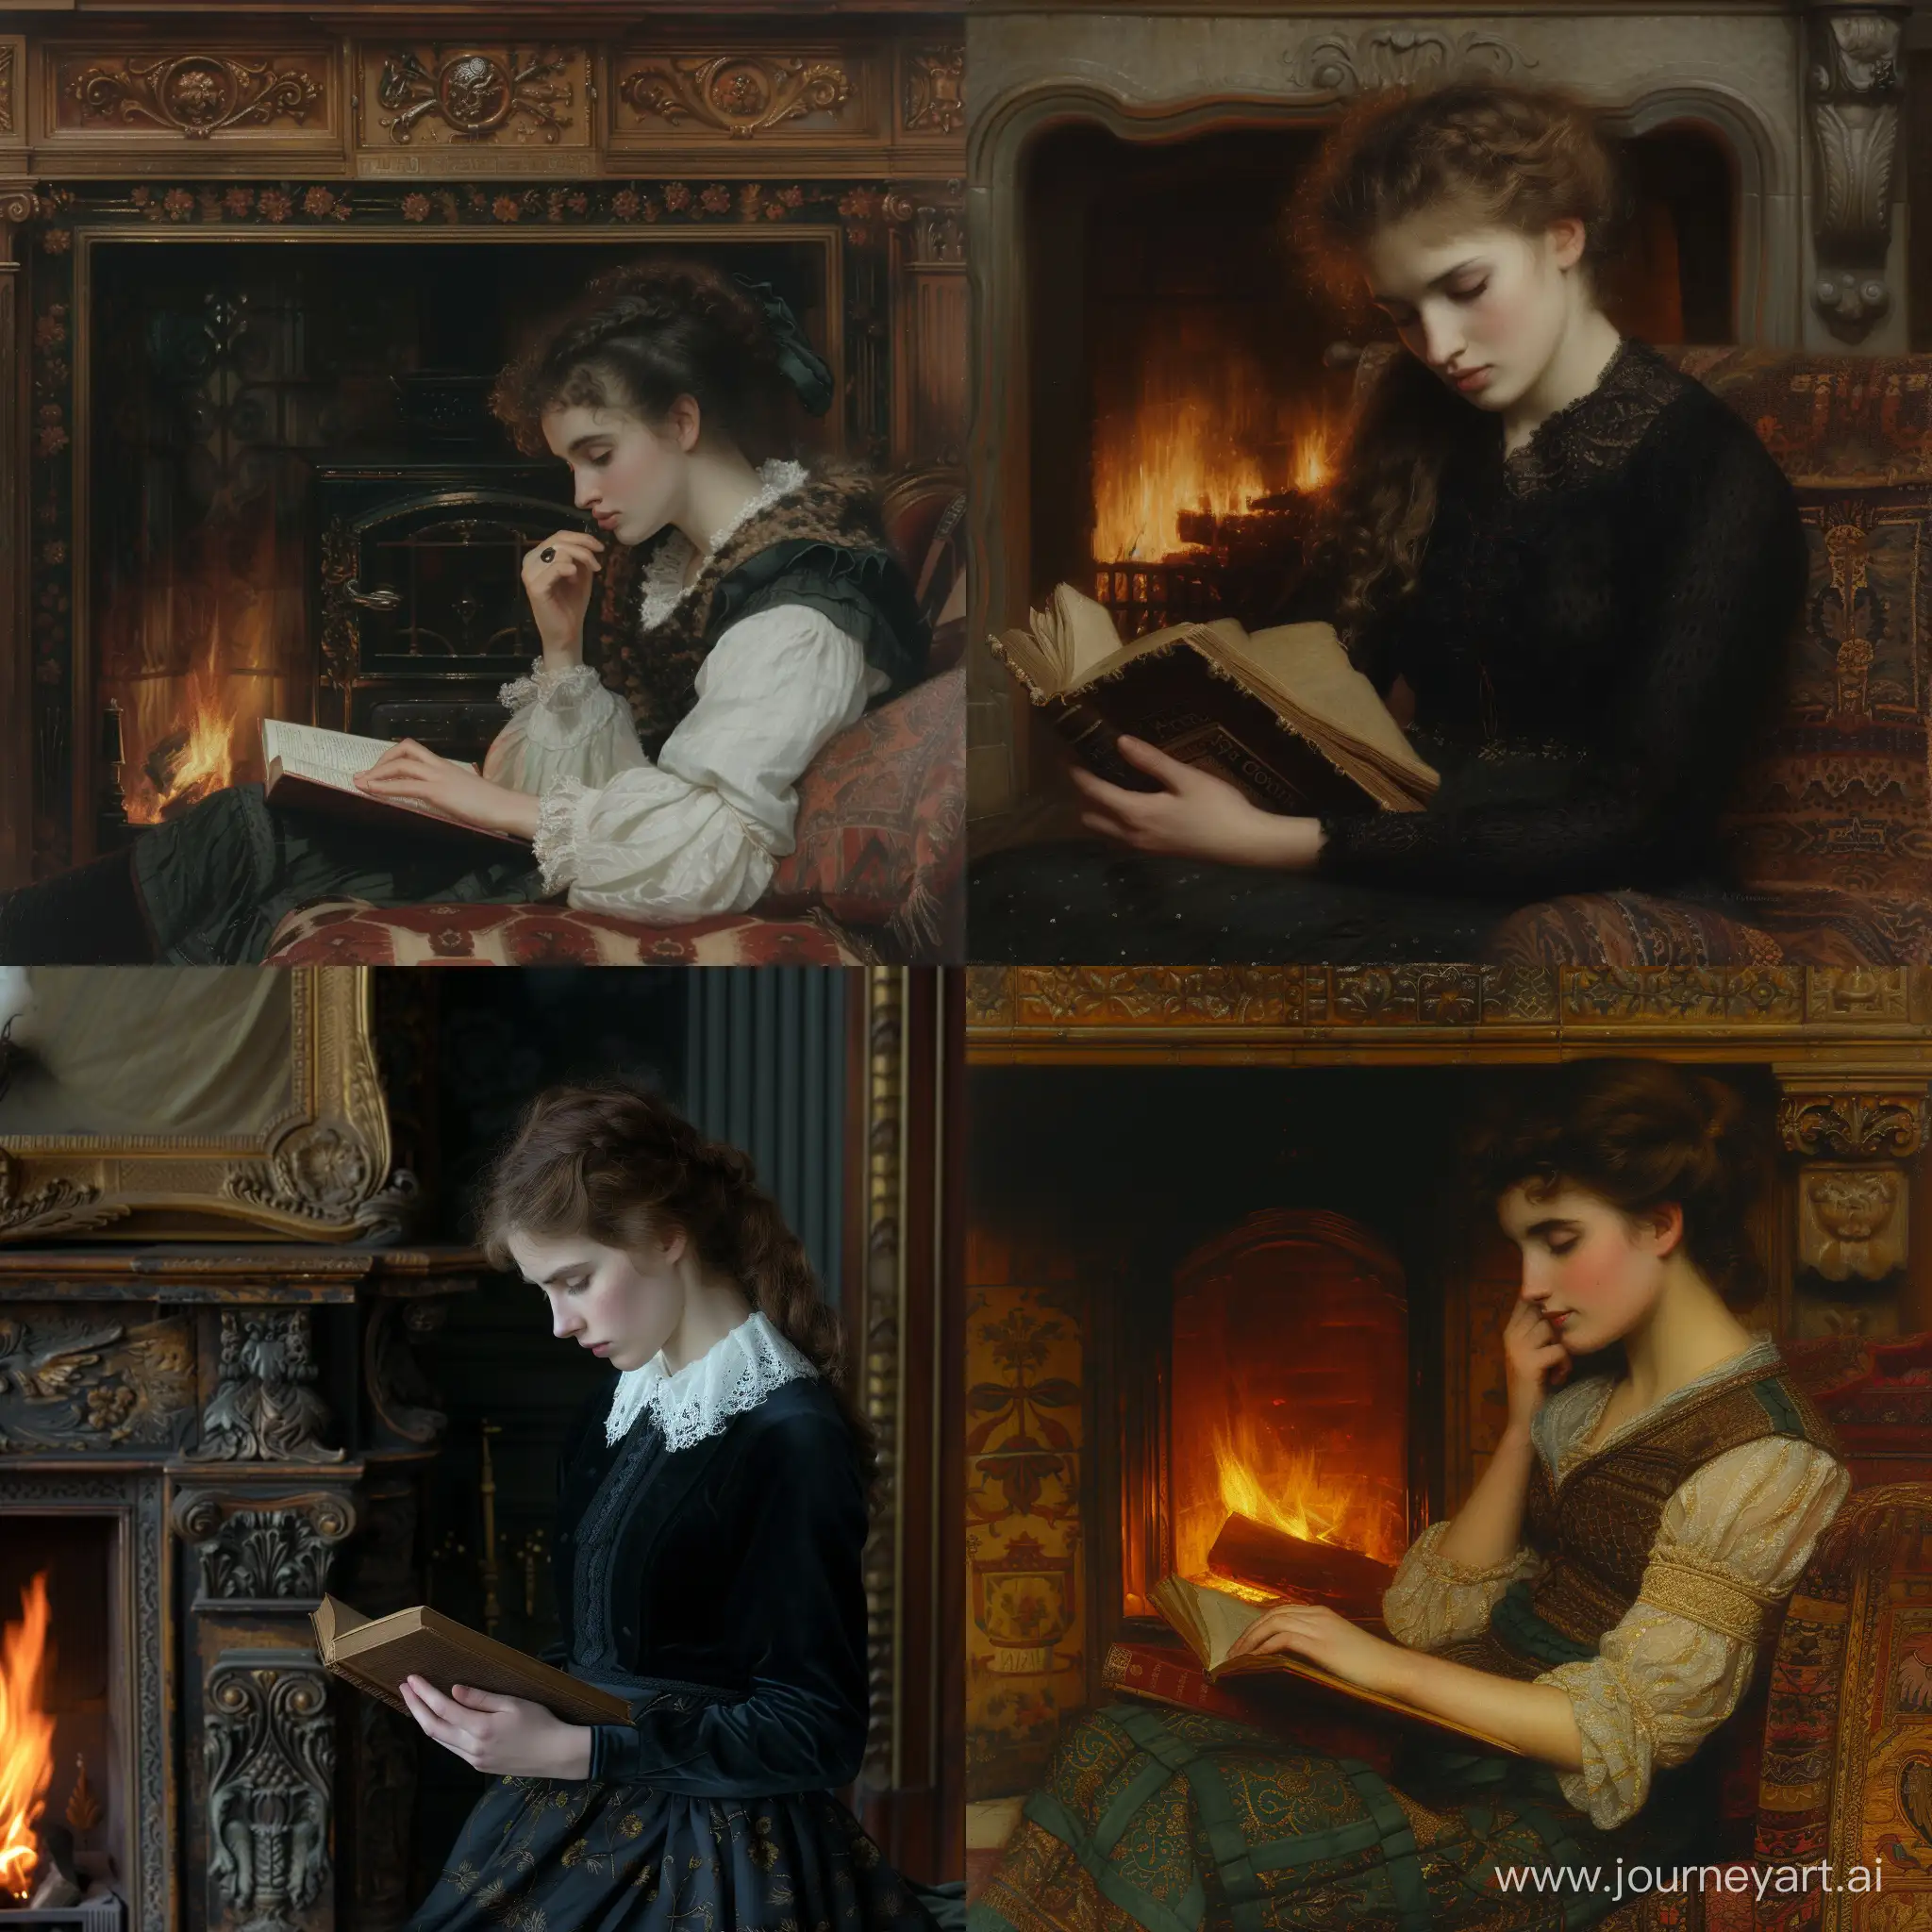 19th-Century-Irish-Woman-Reflecting-by-Fireplace-with-Book